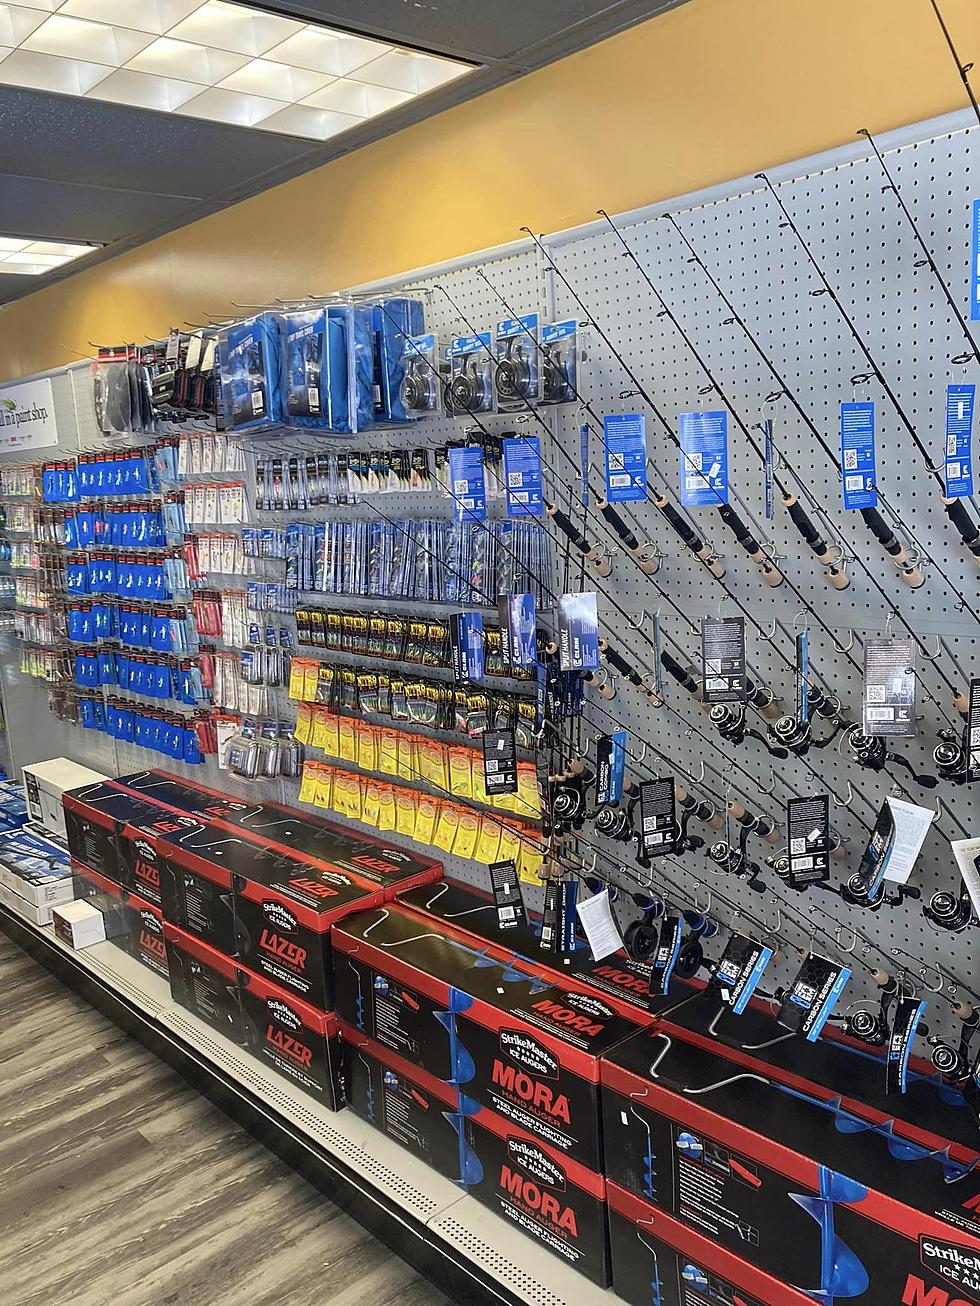 11 Upstate New York Sporting Goods Stores That Are Ready To Go!!